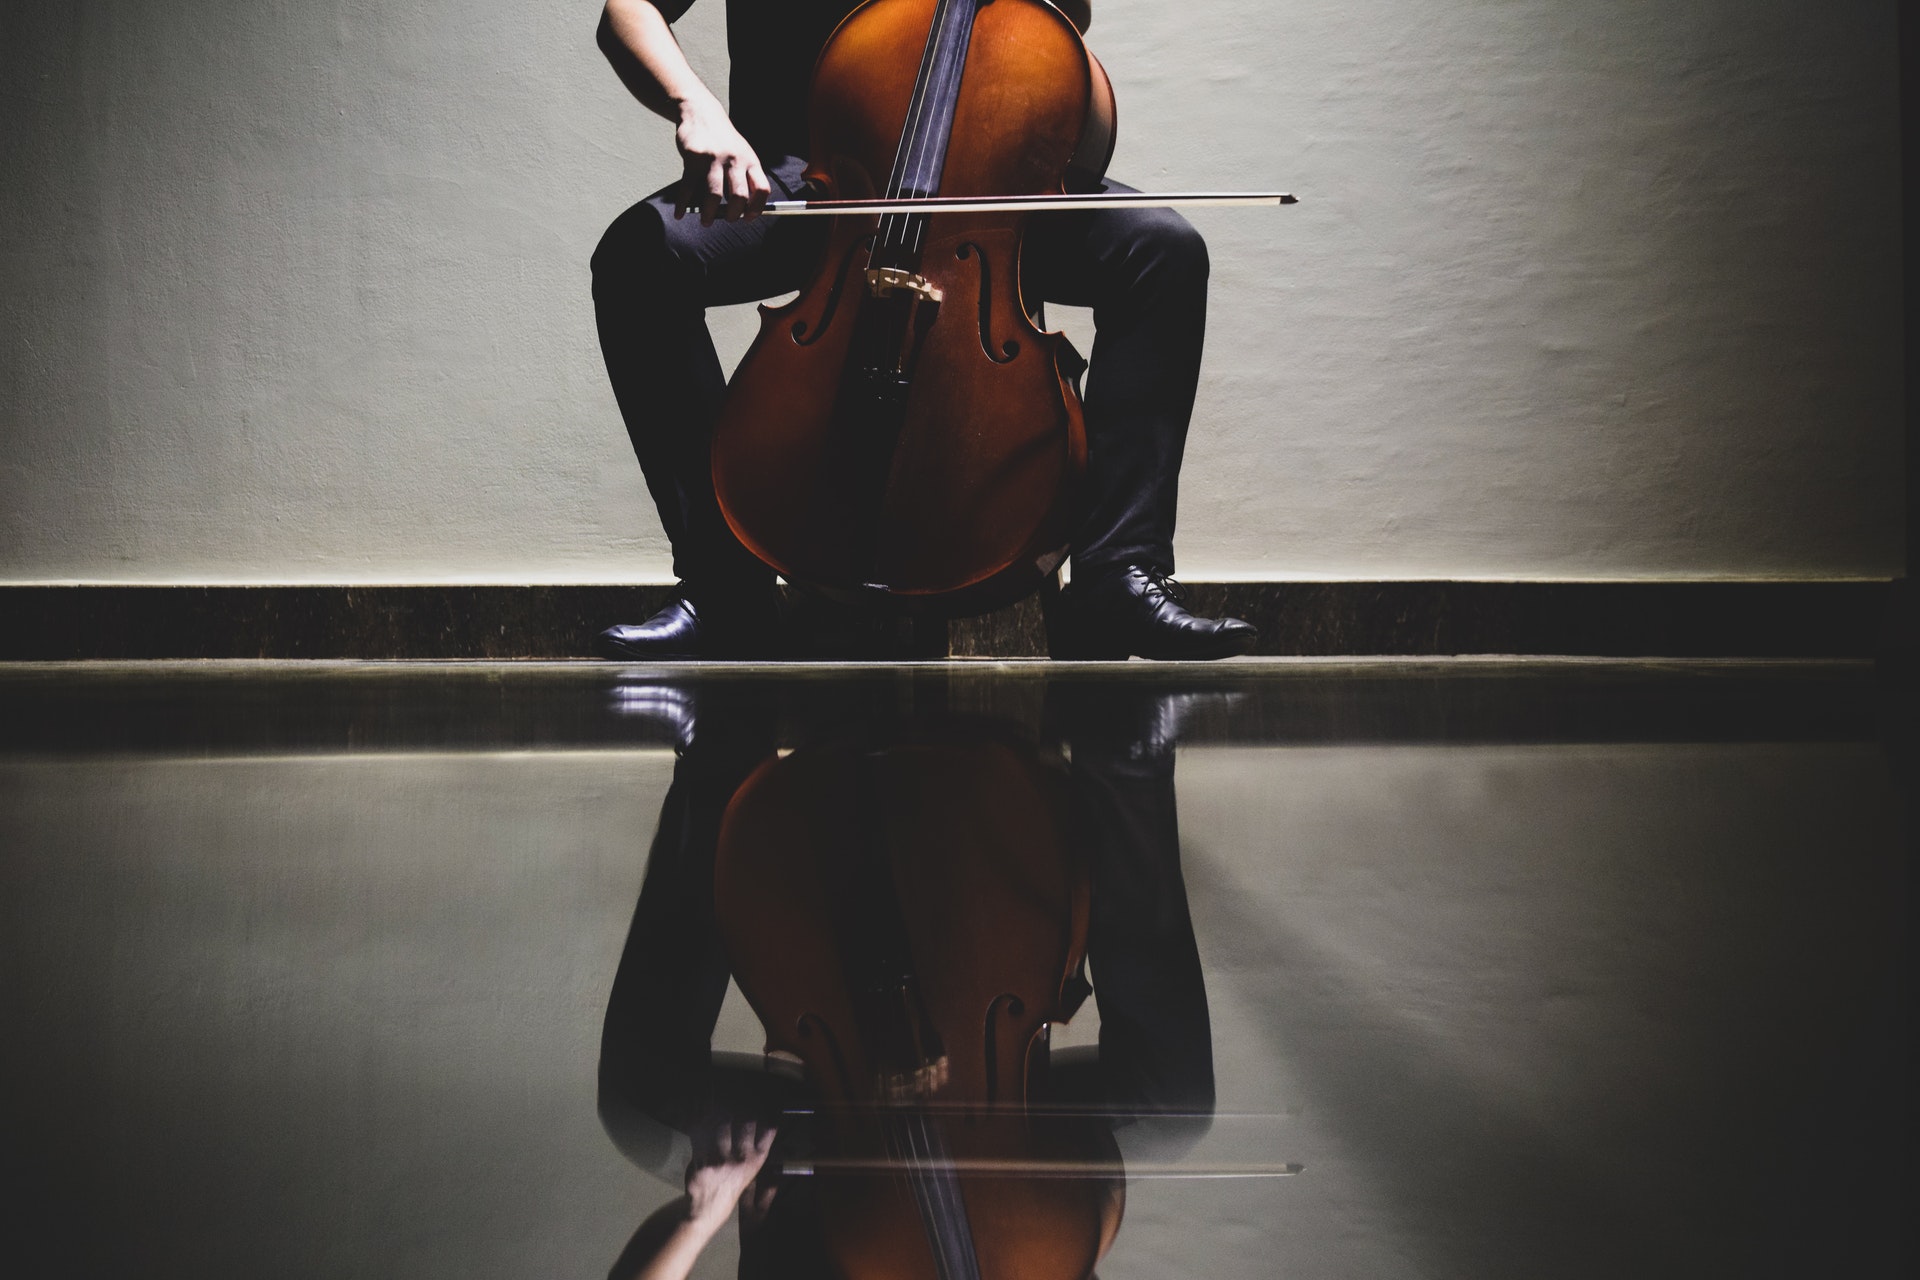 What’s the Difference Between a Cello and Double Bass?